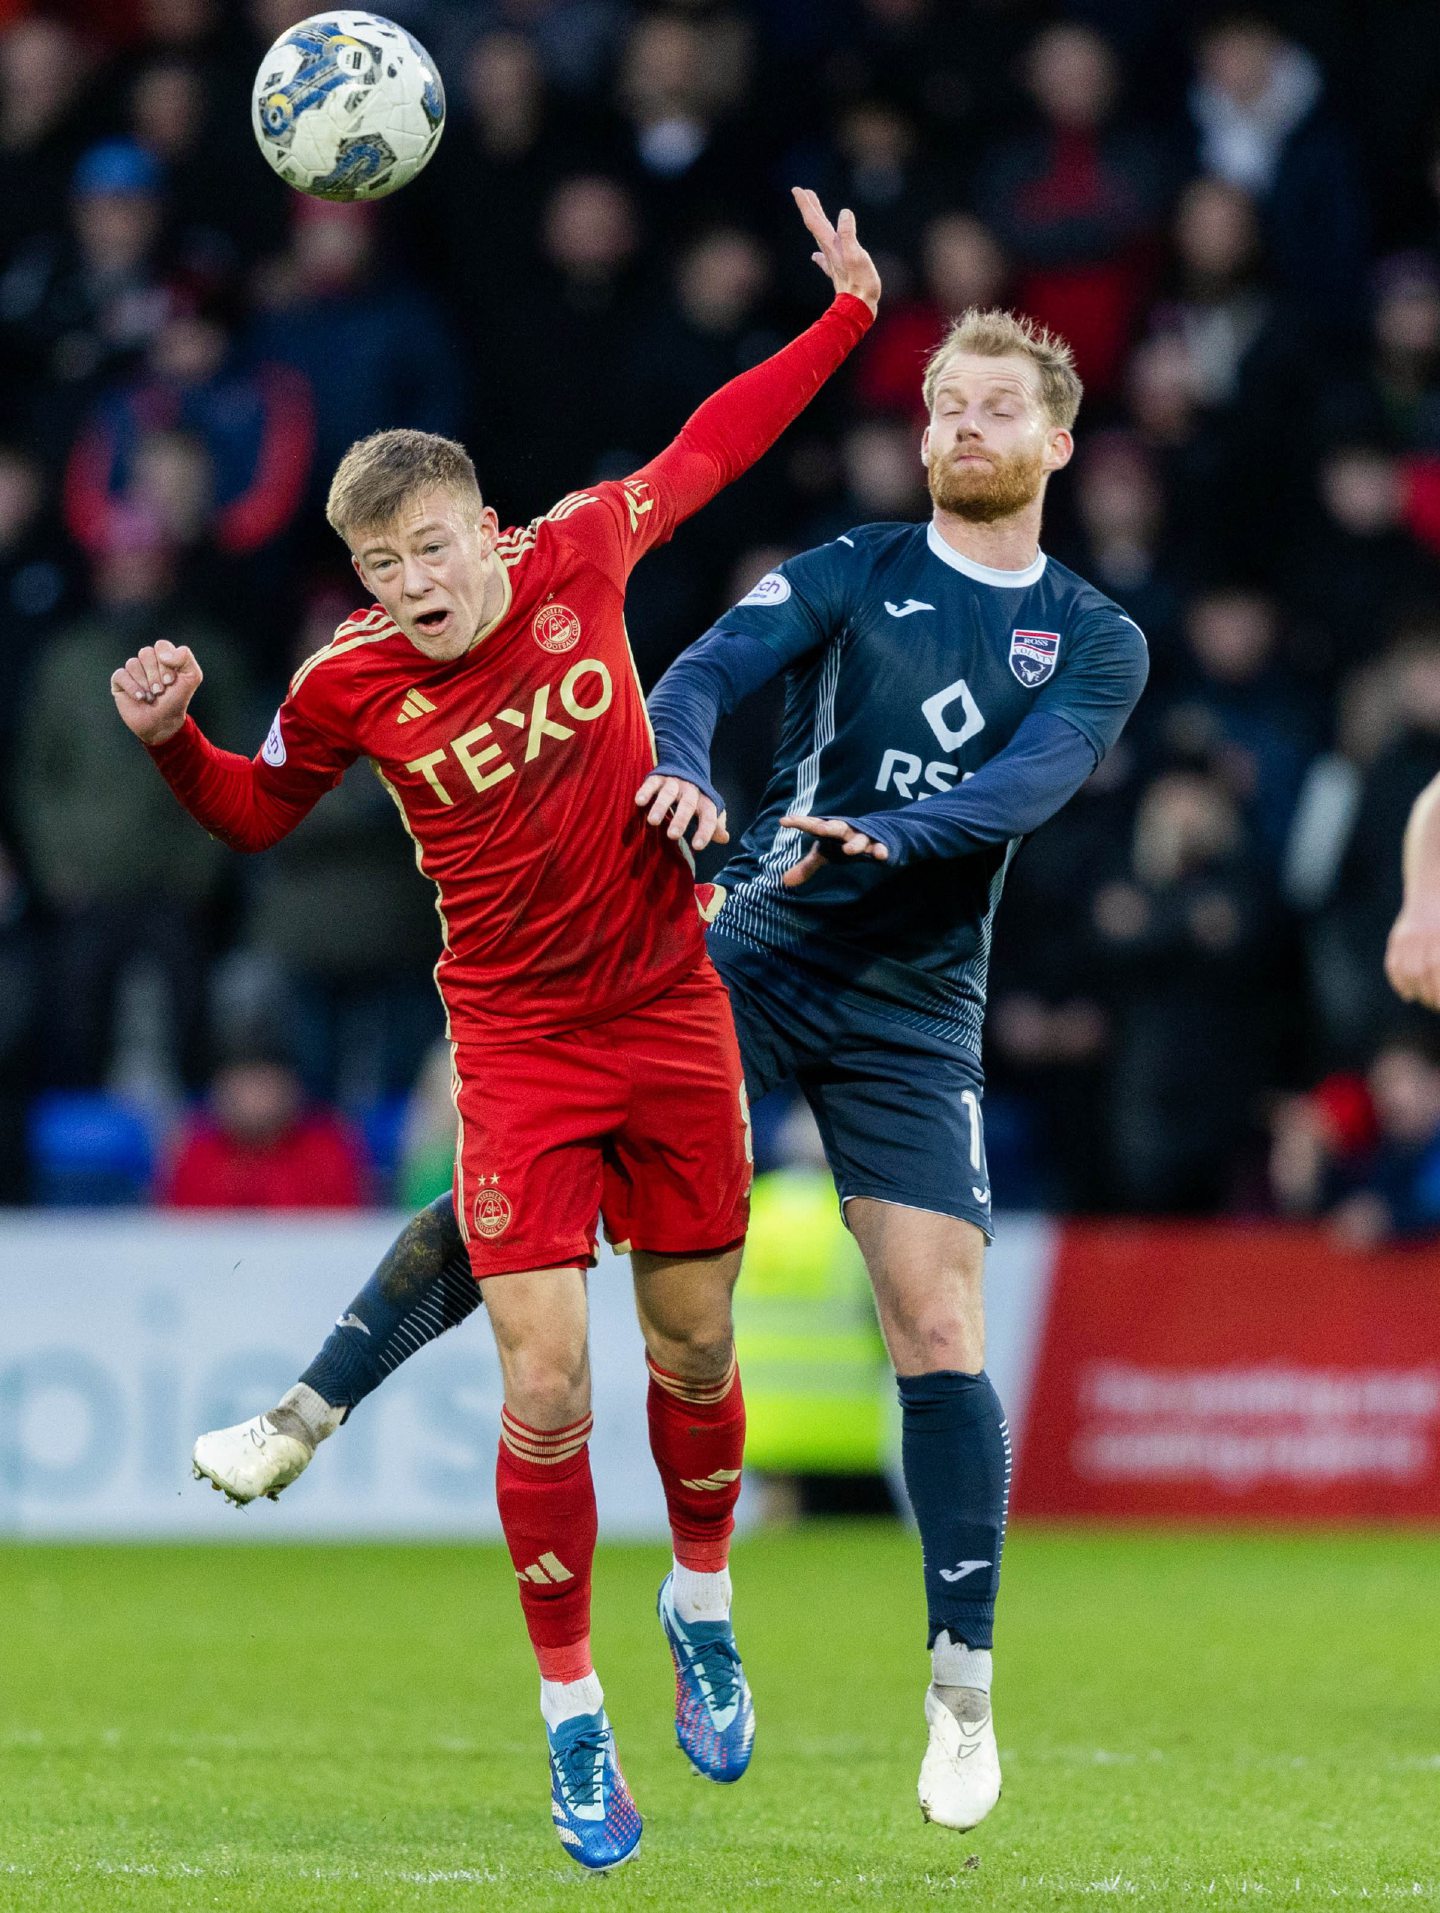 Aberdeen's Connor Barron (L) and Ross County's Josh Sims in action in the Dons' 3-0 Premiership win in Dingwall. Image; SNS 